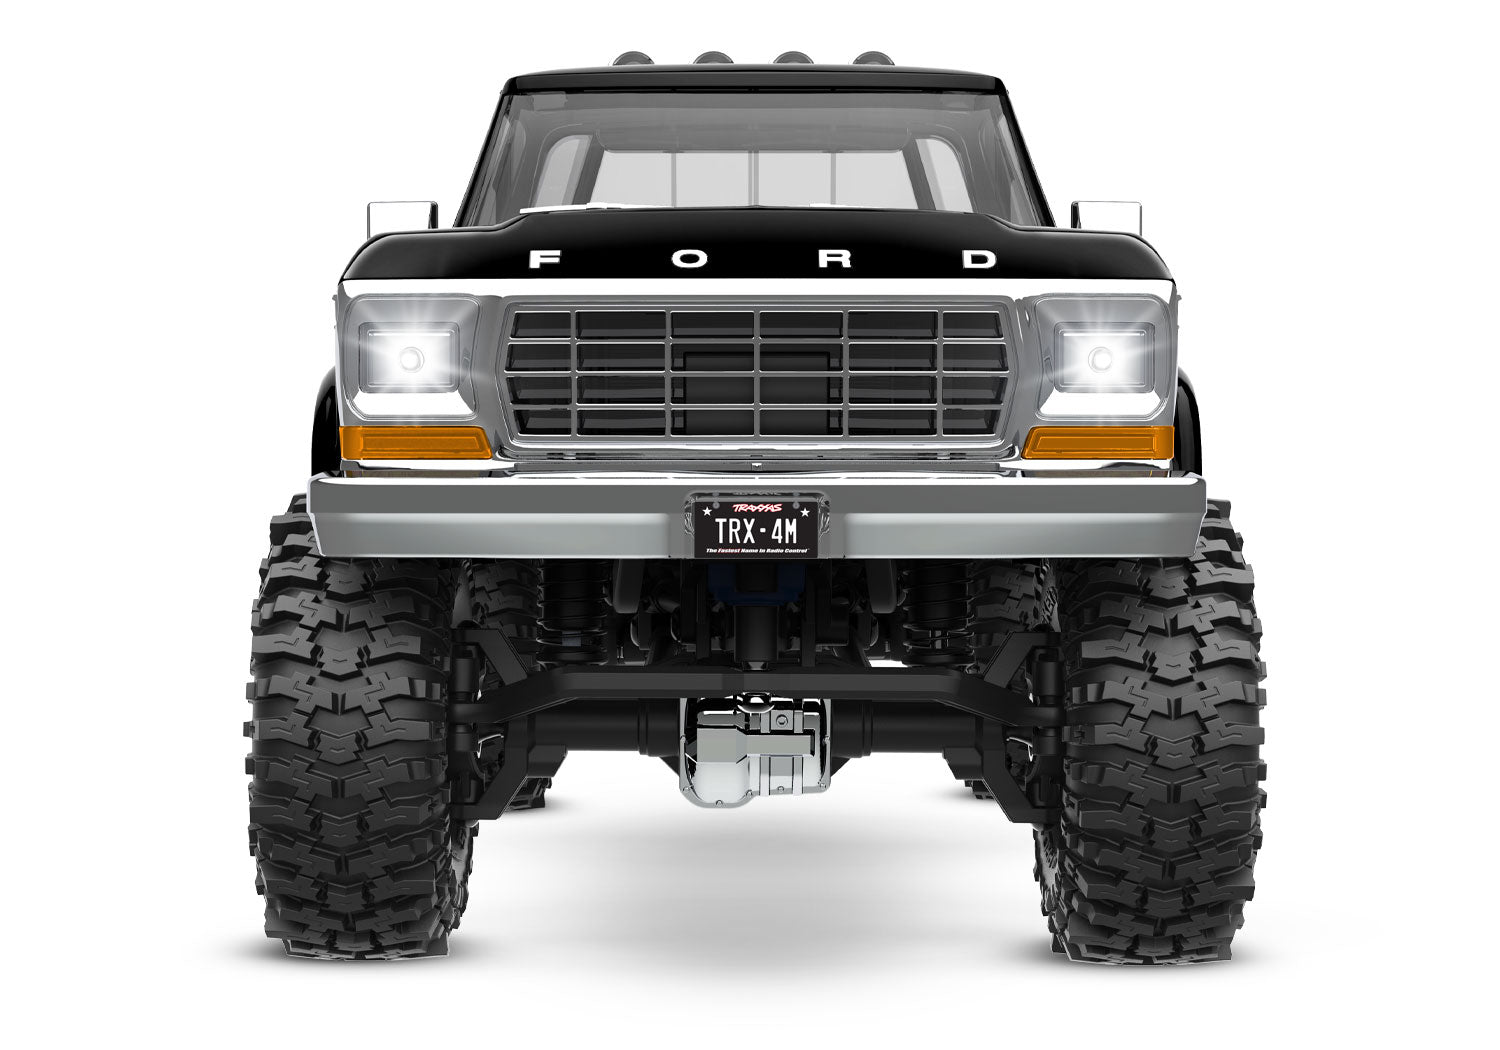 Black TRX-4M™ Scale and Trail® Crawler with 1979 Ford® F-150® Truck Body: 1/18-Scale 4WD Electric Truck with TQ 2.4GHz Radio System